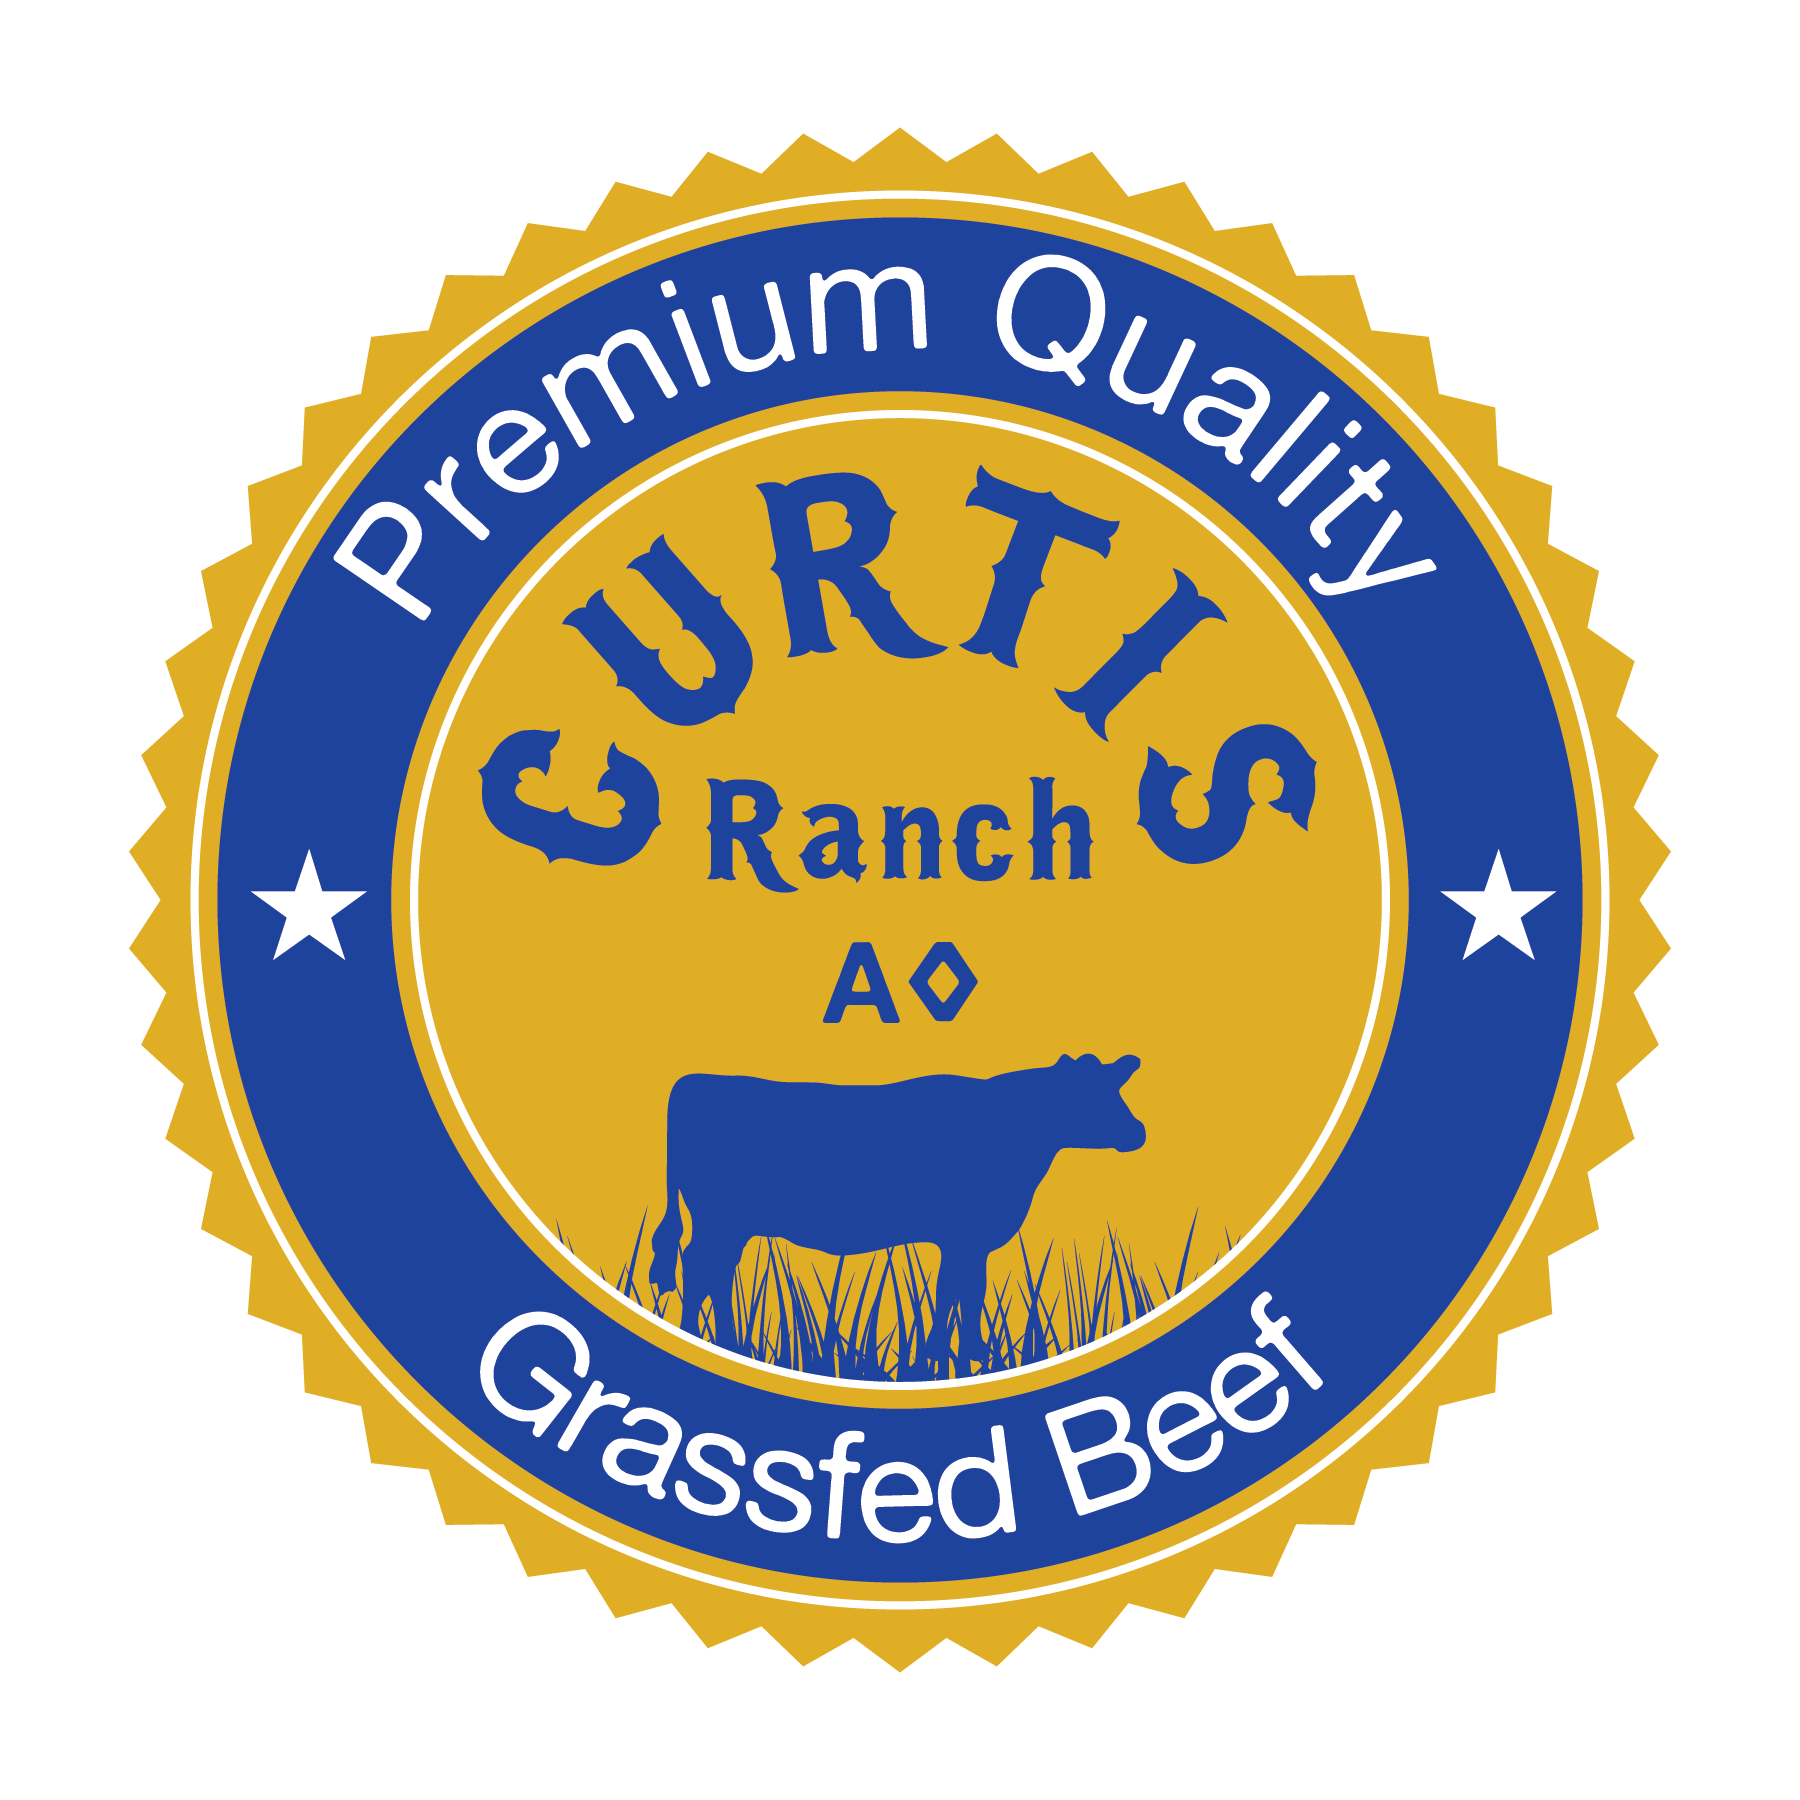 A Curtis Ranch Premium Quality Grassfed Beef